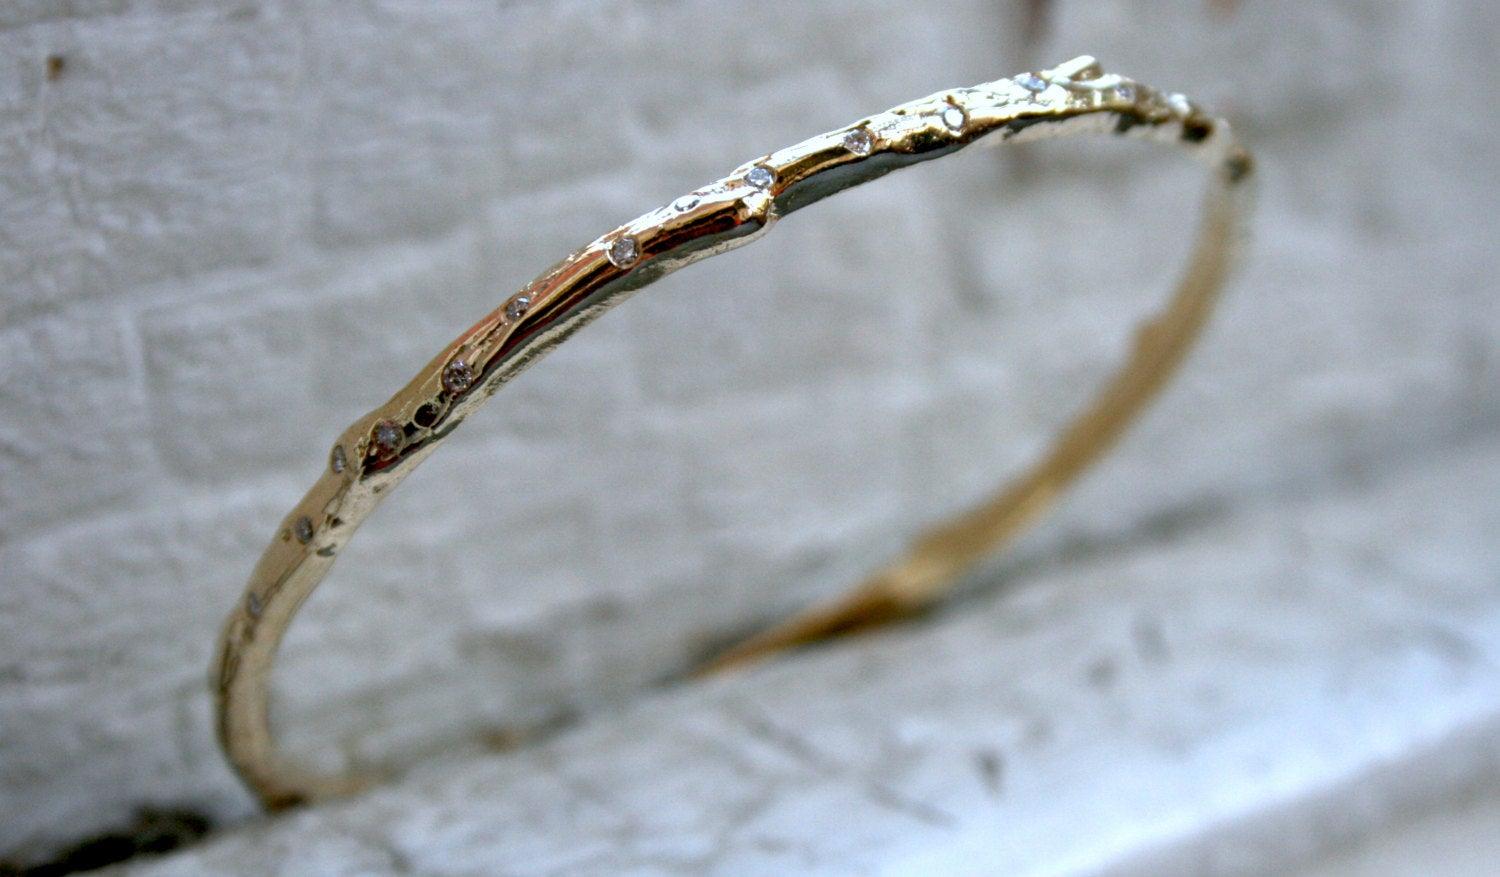 This Twig Style Diamond 14K Yellow Gold Bangle Bracelet is a design I just LOVE! Crafted in any metal, the bangle features gorgeous Round Brilliant Cut Diamonds set in eternity around the bangle! There are a total of 40 Round Brilliant Cut Diamonds,